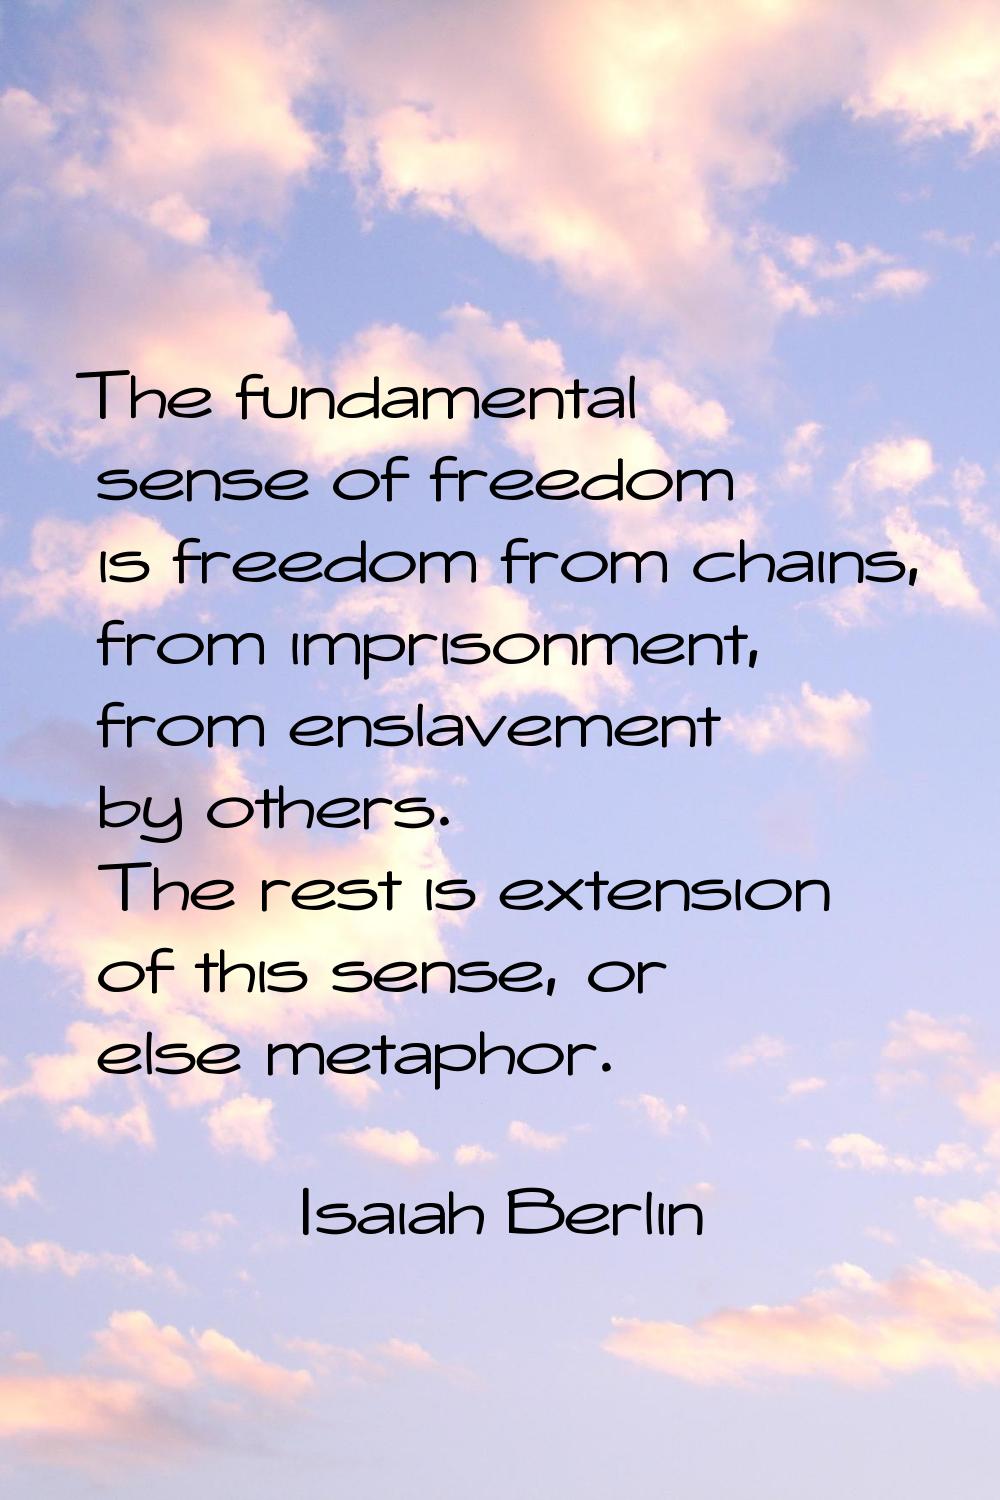 The fundamental sense of freedom is freedom from chains, from imprisonment, from enslavement by oth